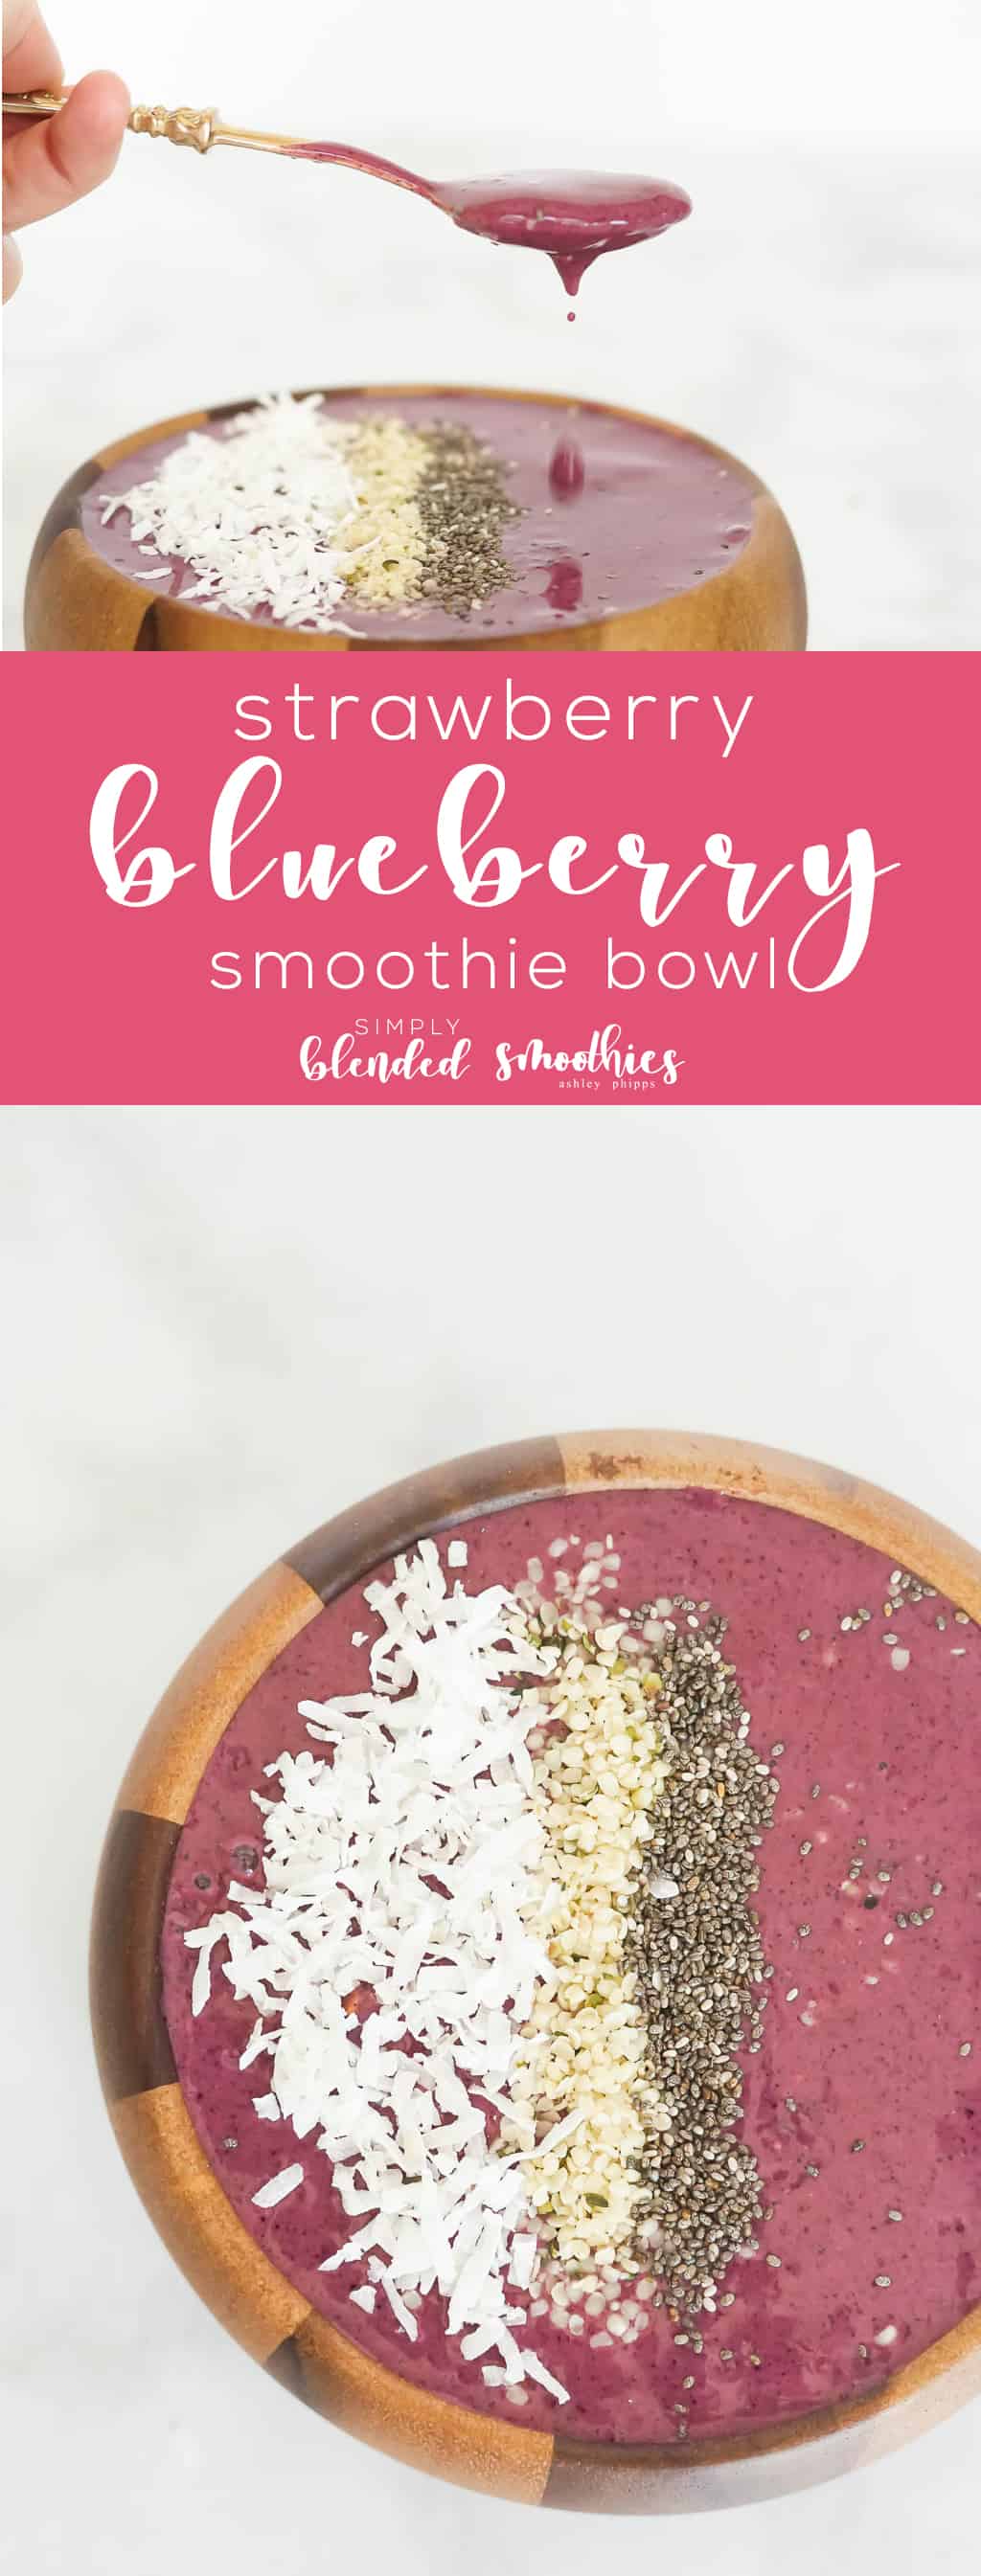 Strawberry Blueberry Smoothie Bowl - This Smoothie Bowl Is The Perfect Healthy Breakfast